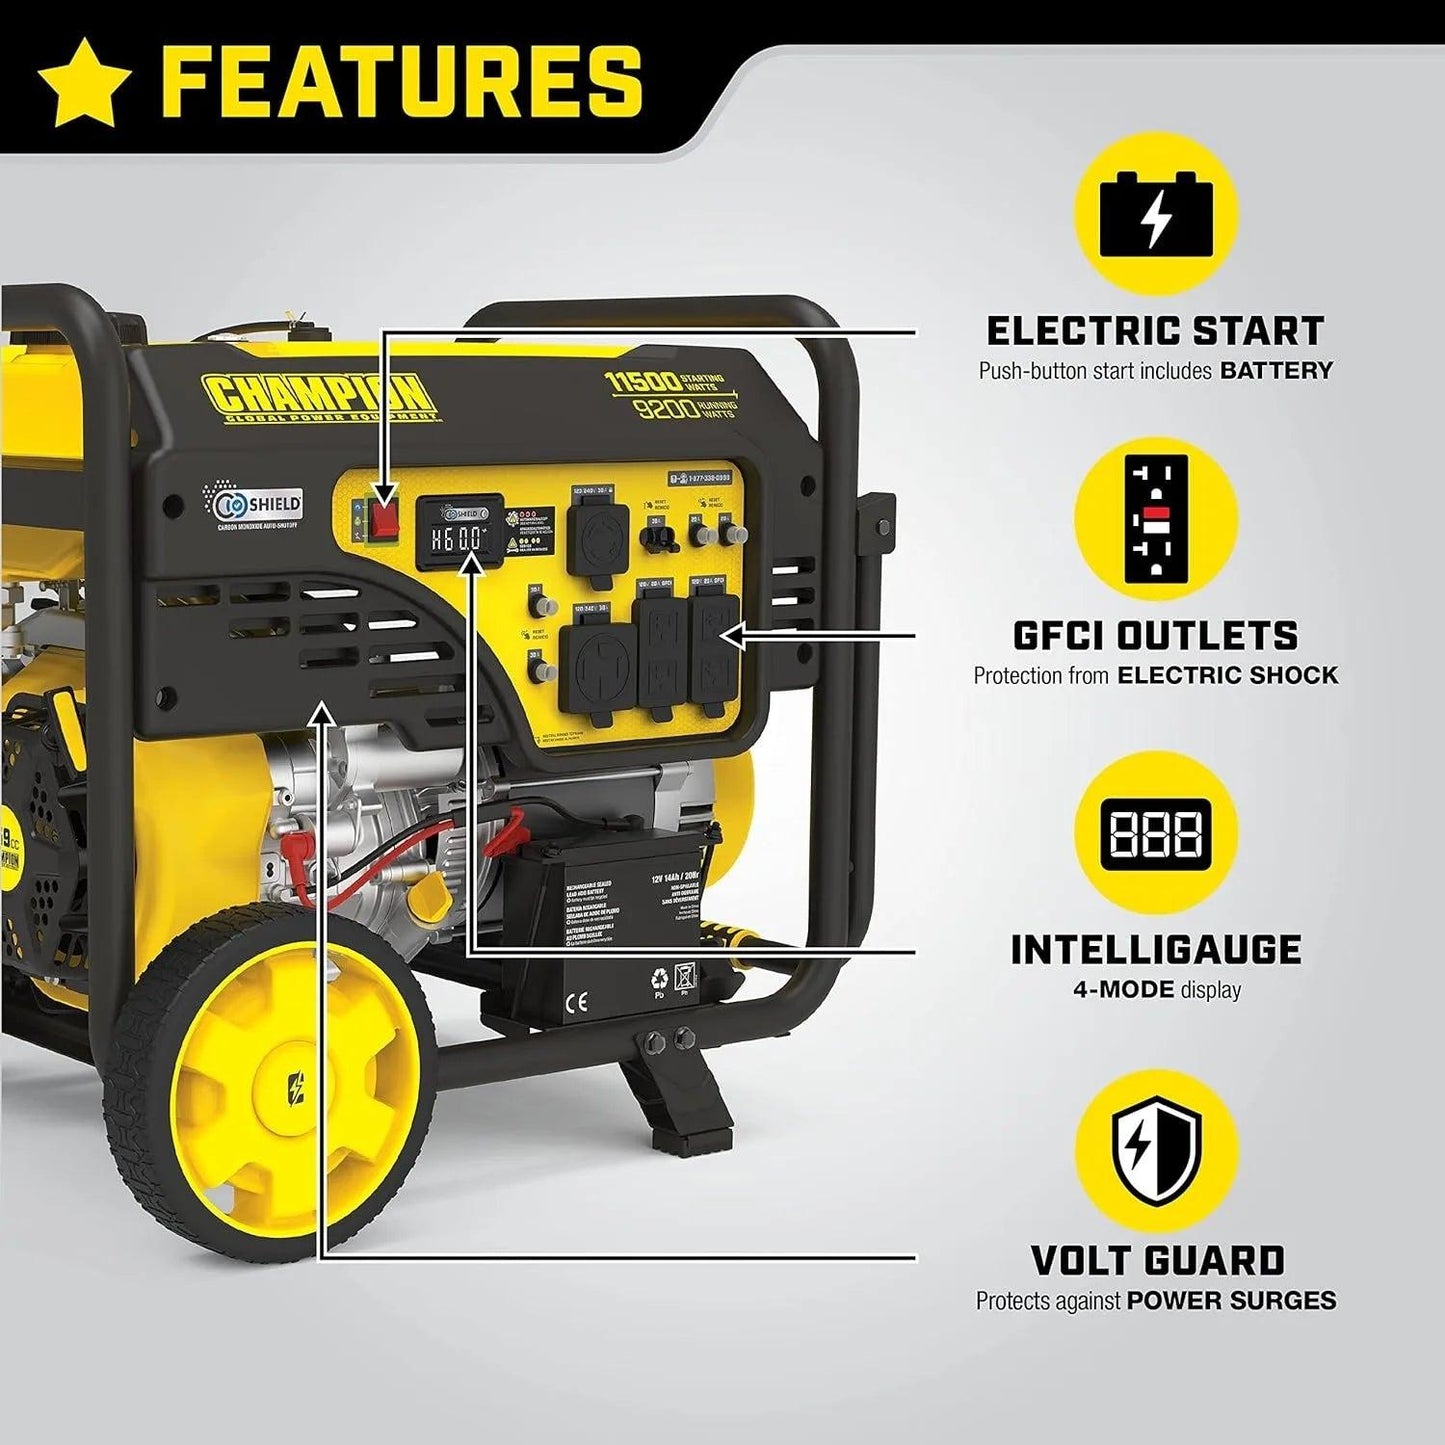 Champion Power Equipment 11,500/9,200-Watt Electric Start Portable Generator with CO Shield - Whole Home Warehouse 